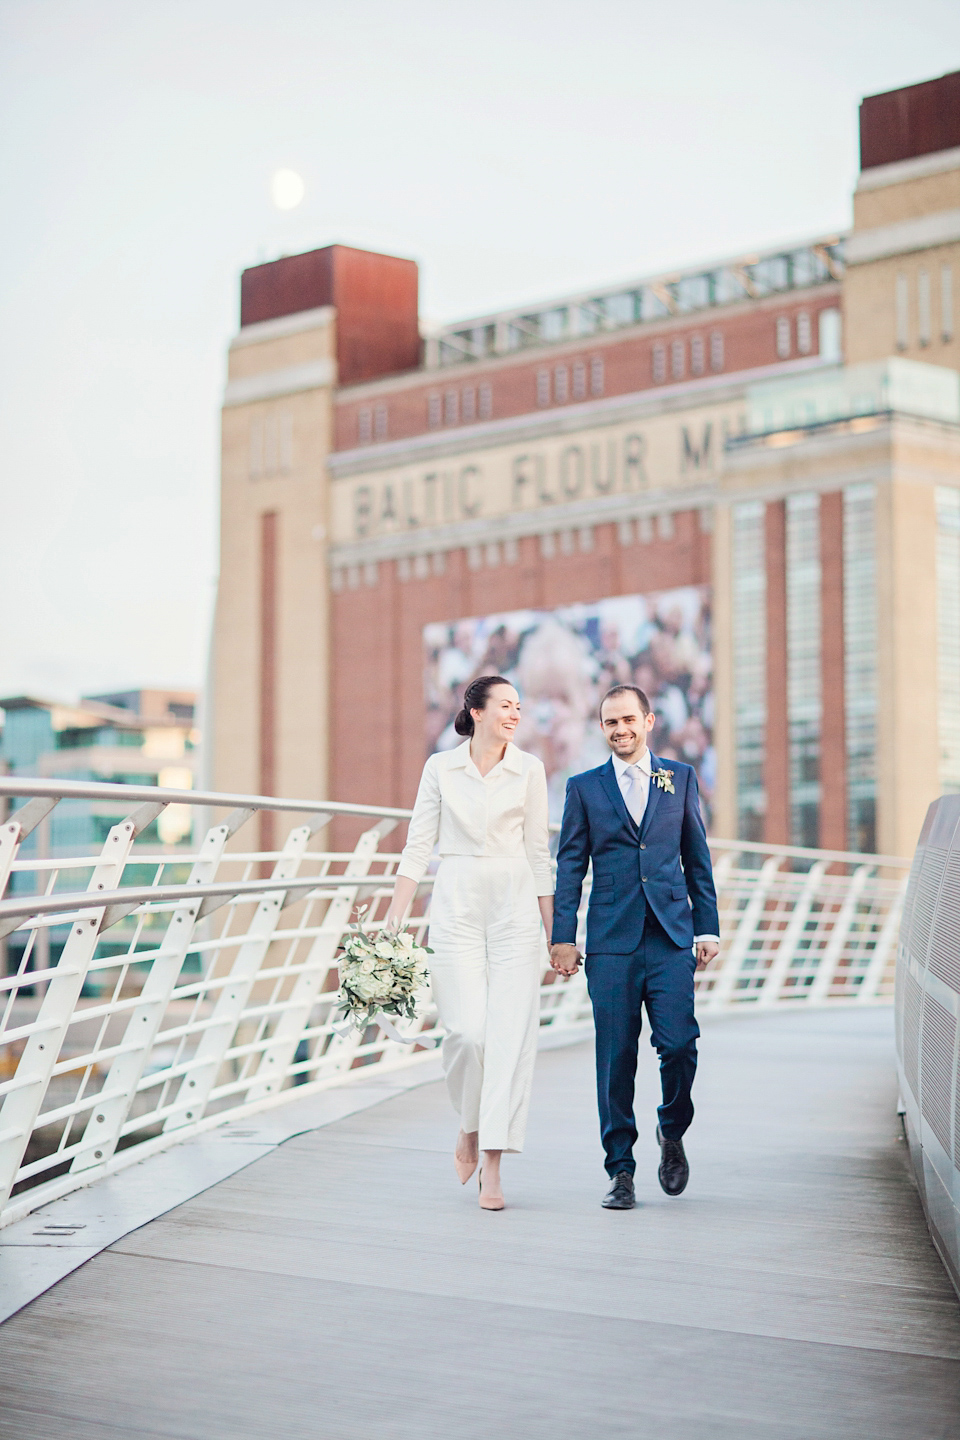 An Emelia Wickstead jumpsuit for a modern day wedding at the Baltic Centre for Contemporary Arts. Photography by Katy Melling.